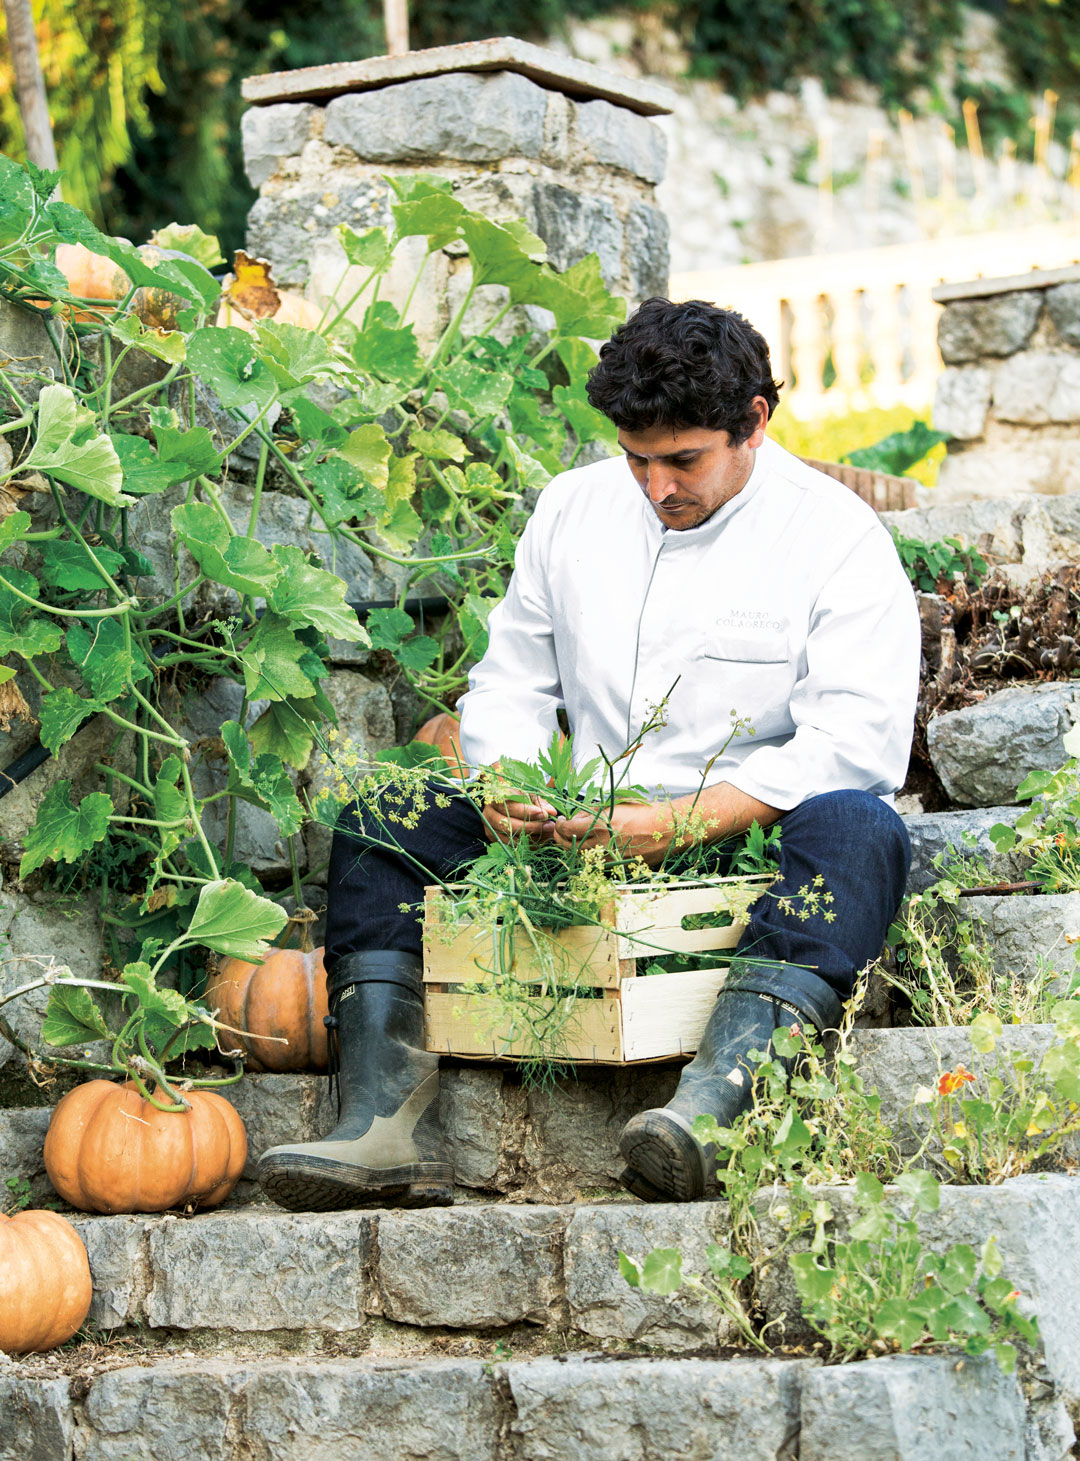 Mauro Colagreco at Mirazur, in Southern France. As featured in The Garden Chef